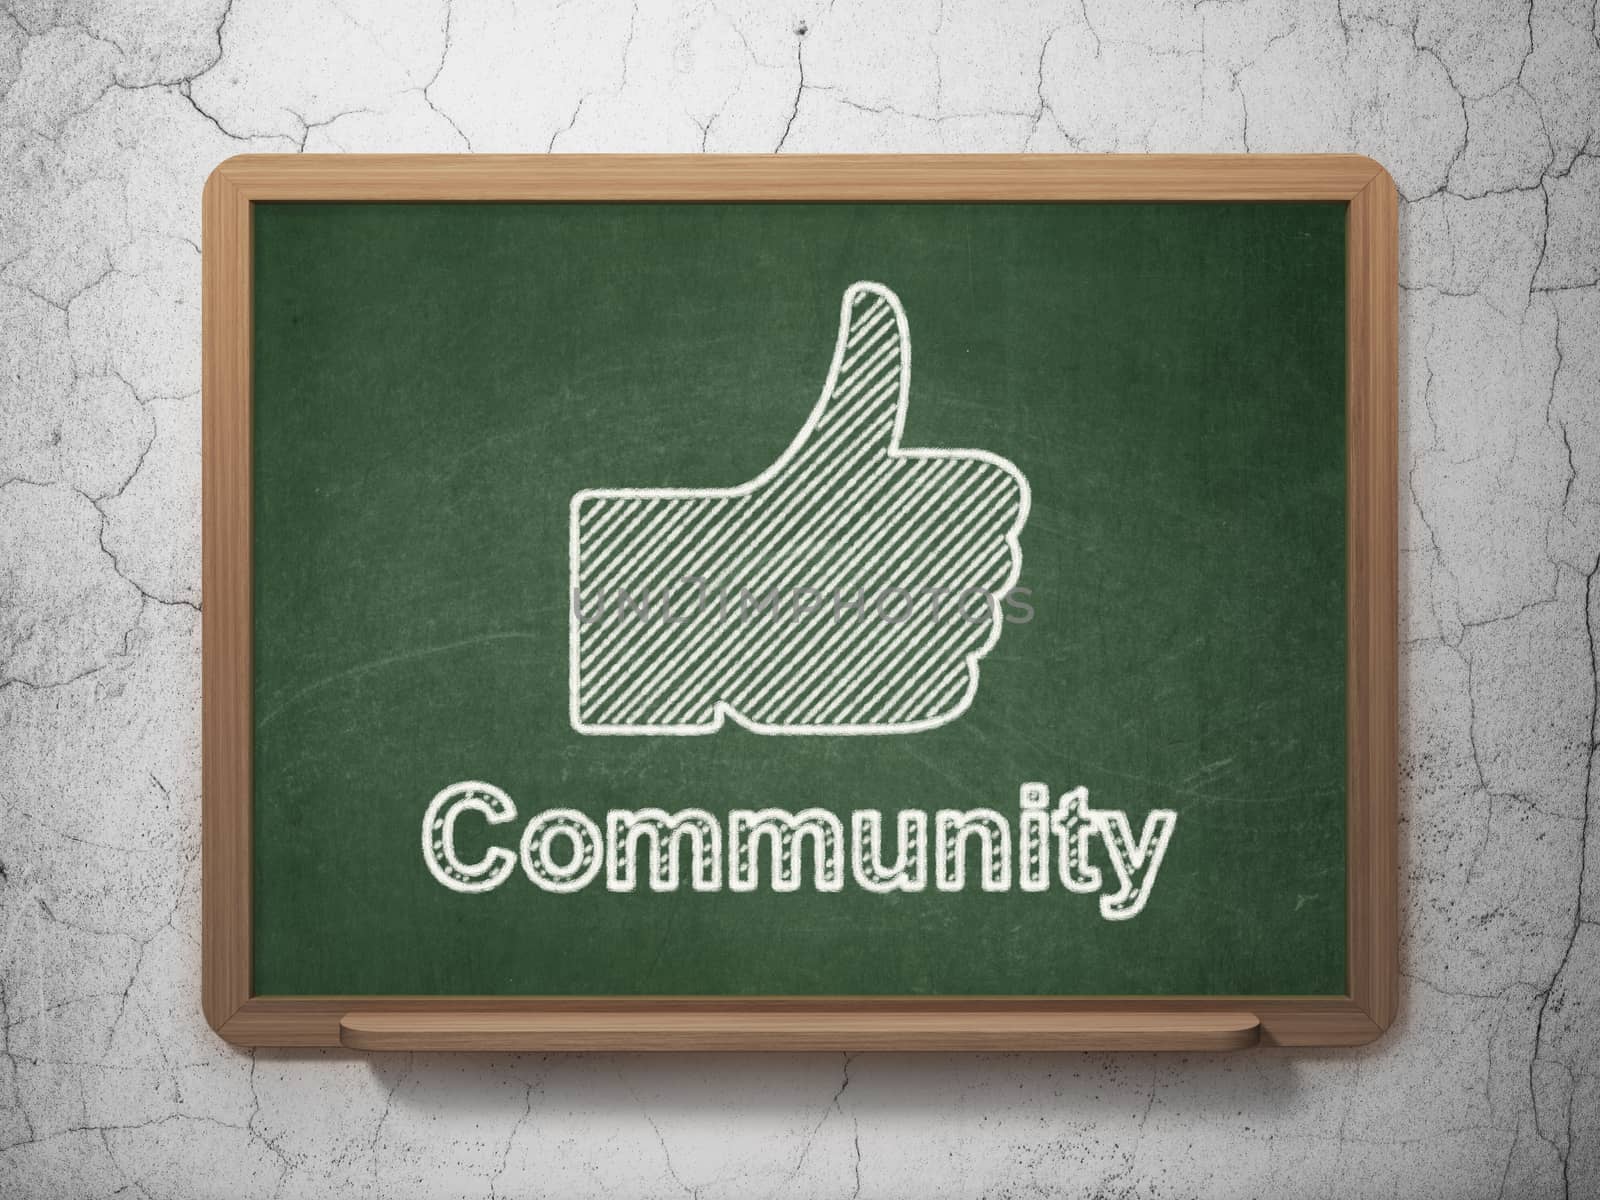 Social media concept: Thumb Up icon and text Community on Green chalkboard on grunge wall background, 3d render